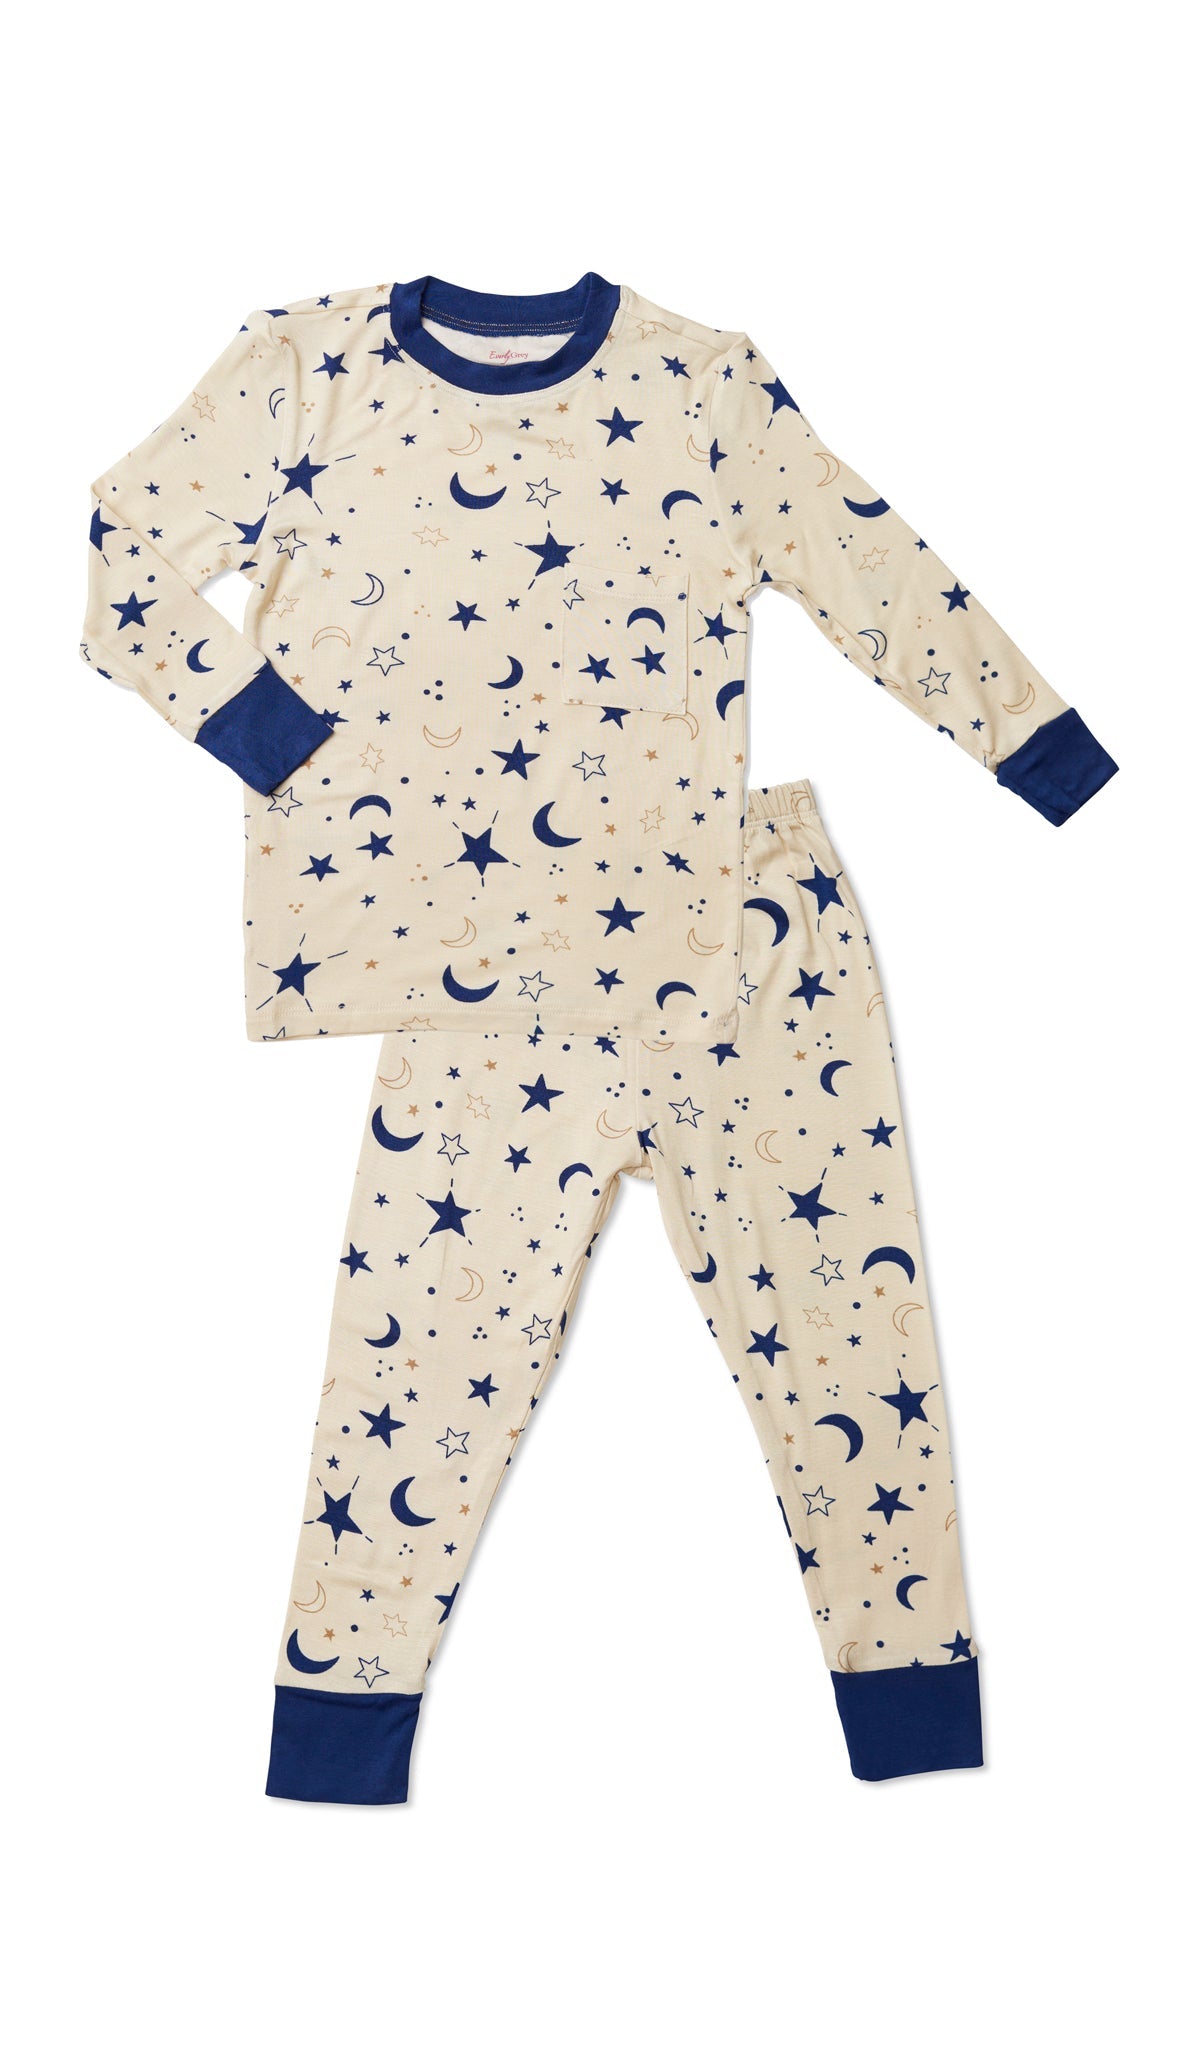 Emerson Kids 2 Piece Pant PJ - Twinkle – Everly Grey